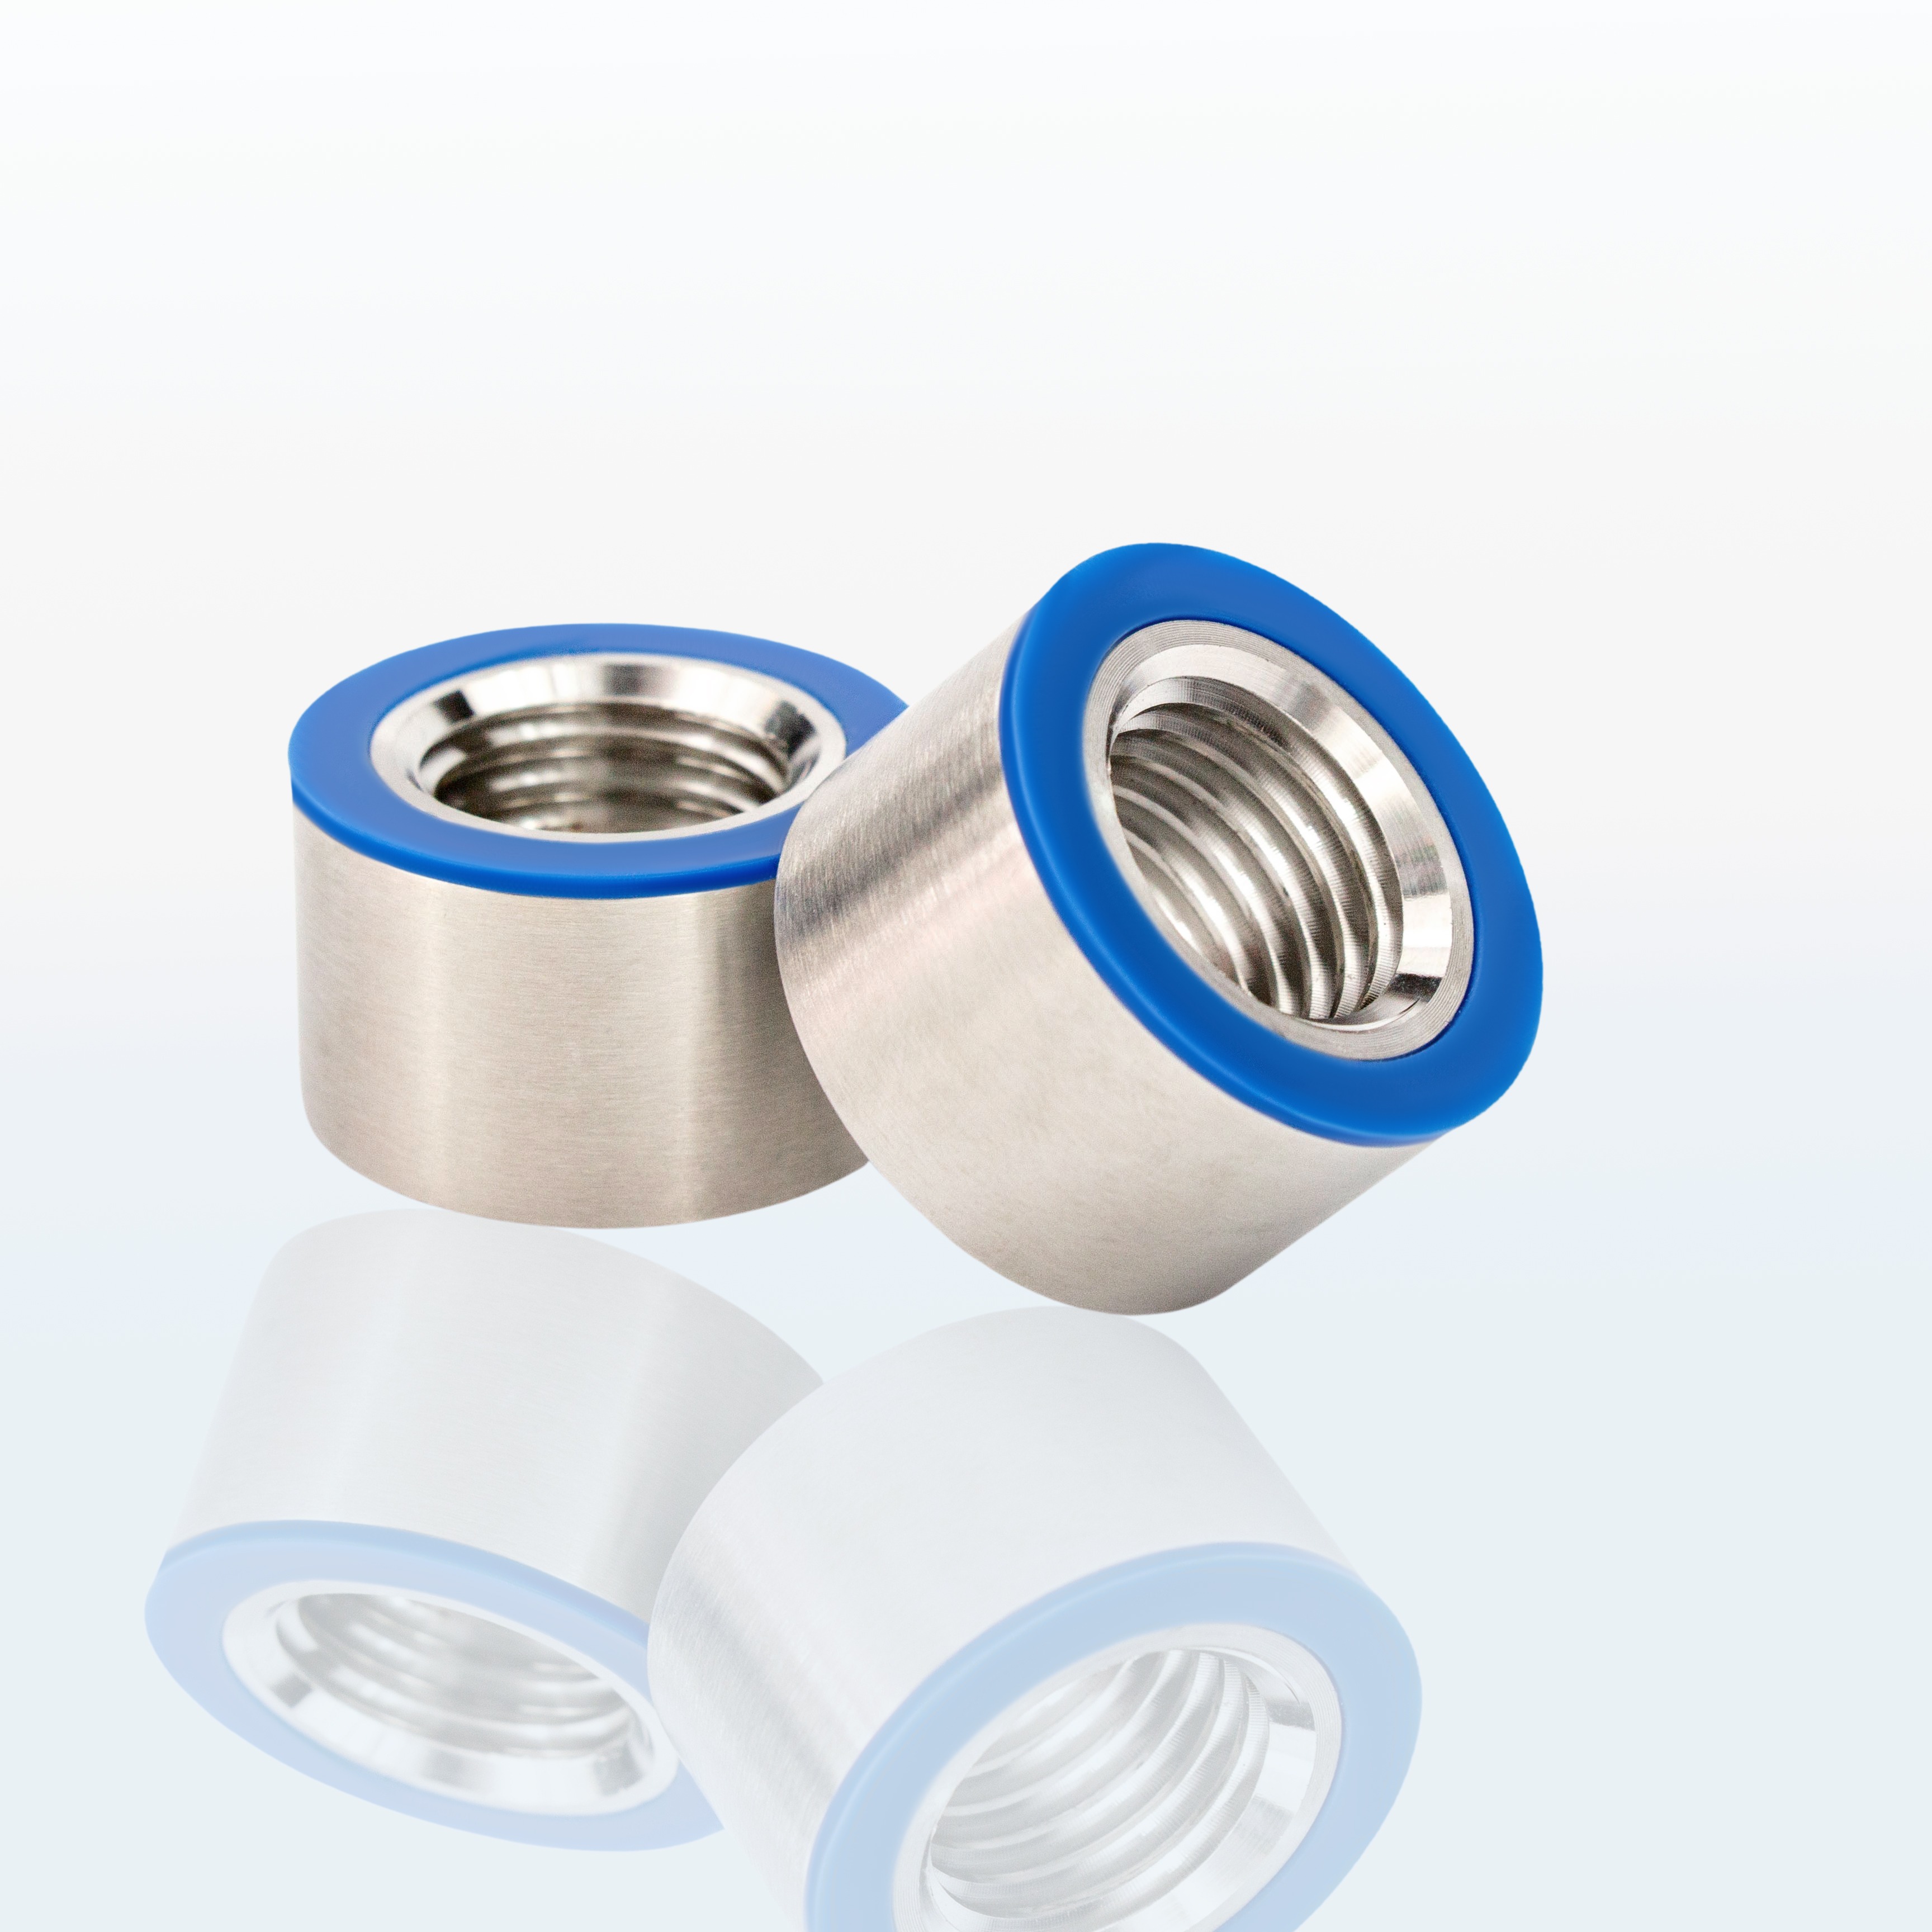 EHEDG Hygienic 3A spacer nut welded in stainless steel